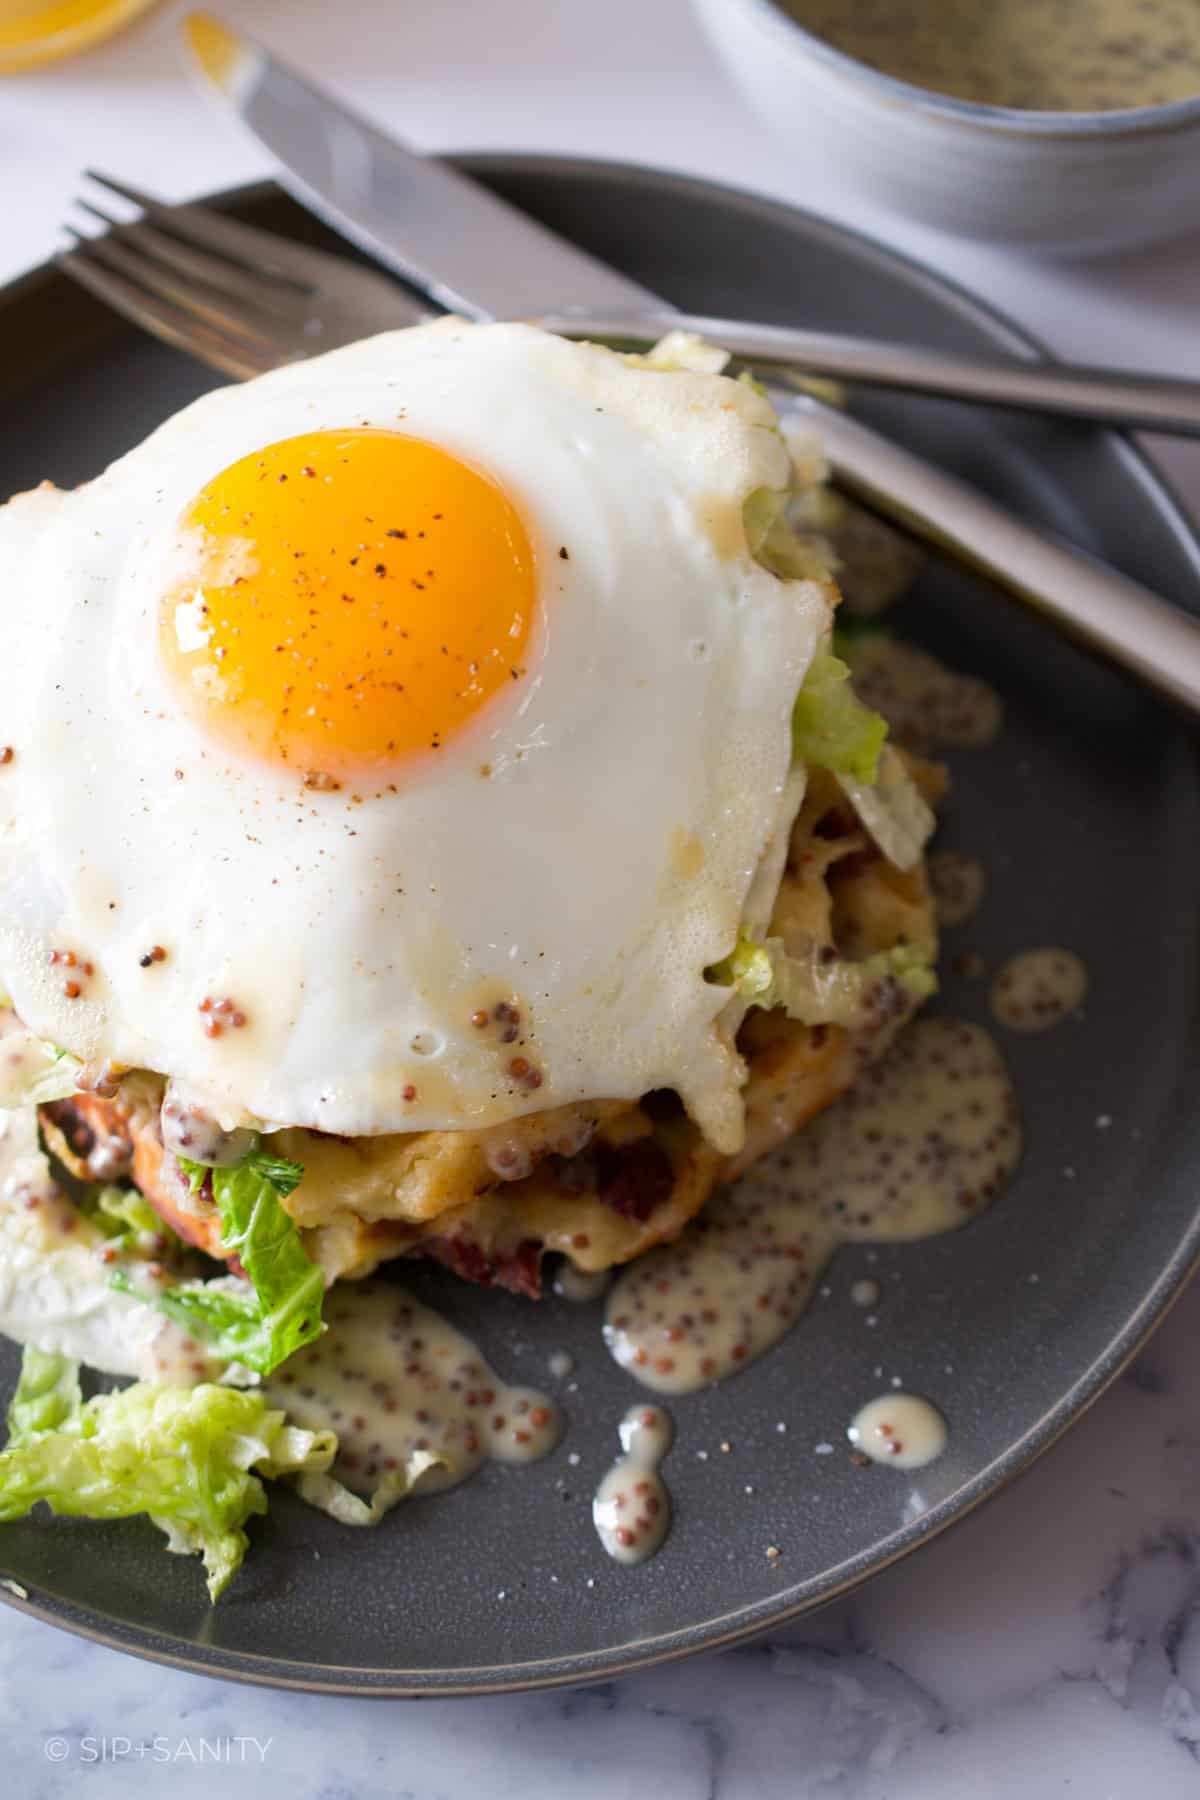 Corned beef hash waffles topped with sautéed savoy cabbage and a fried egg.